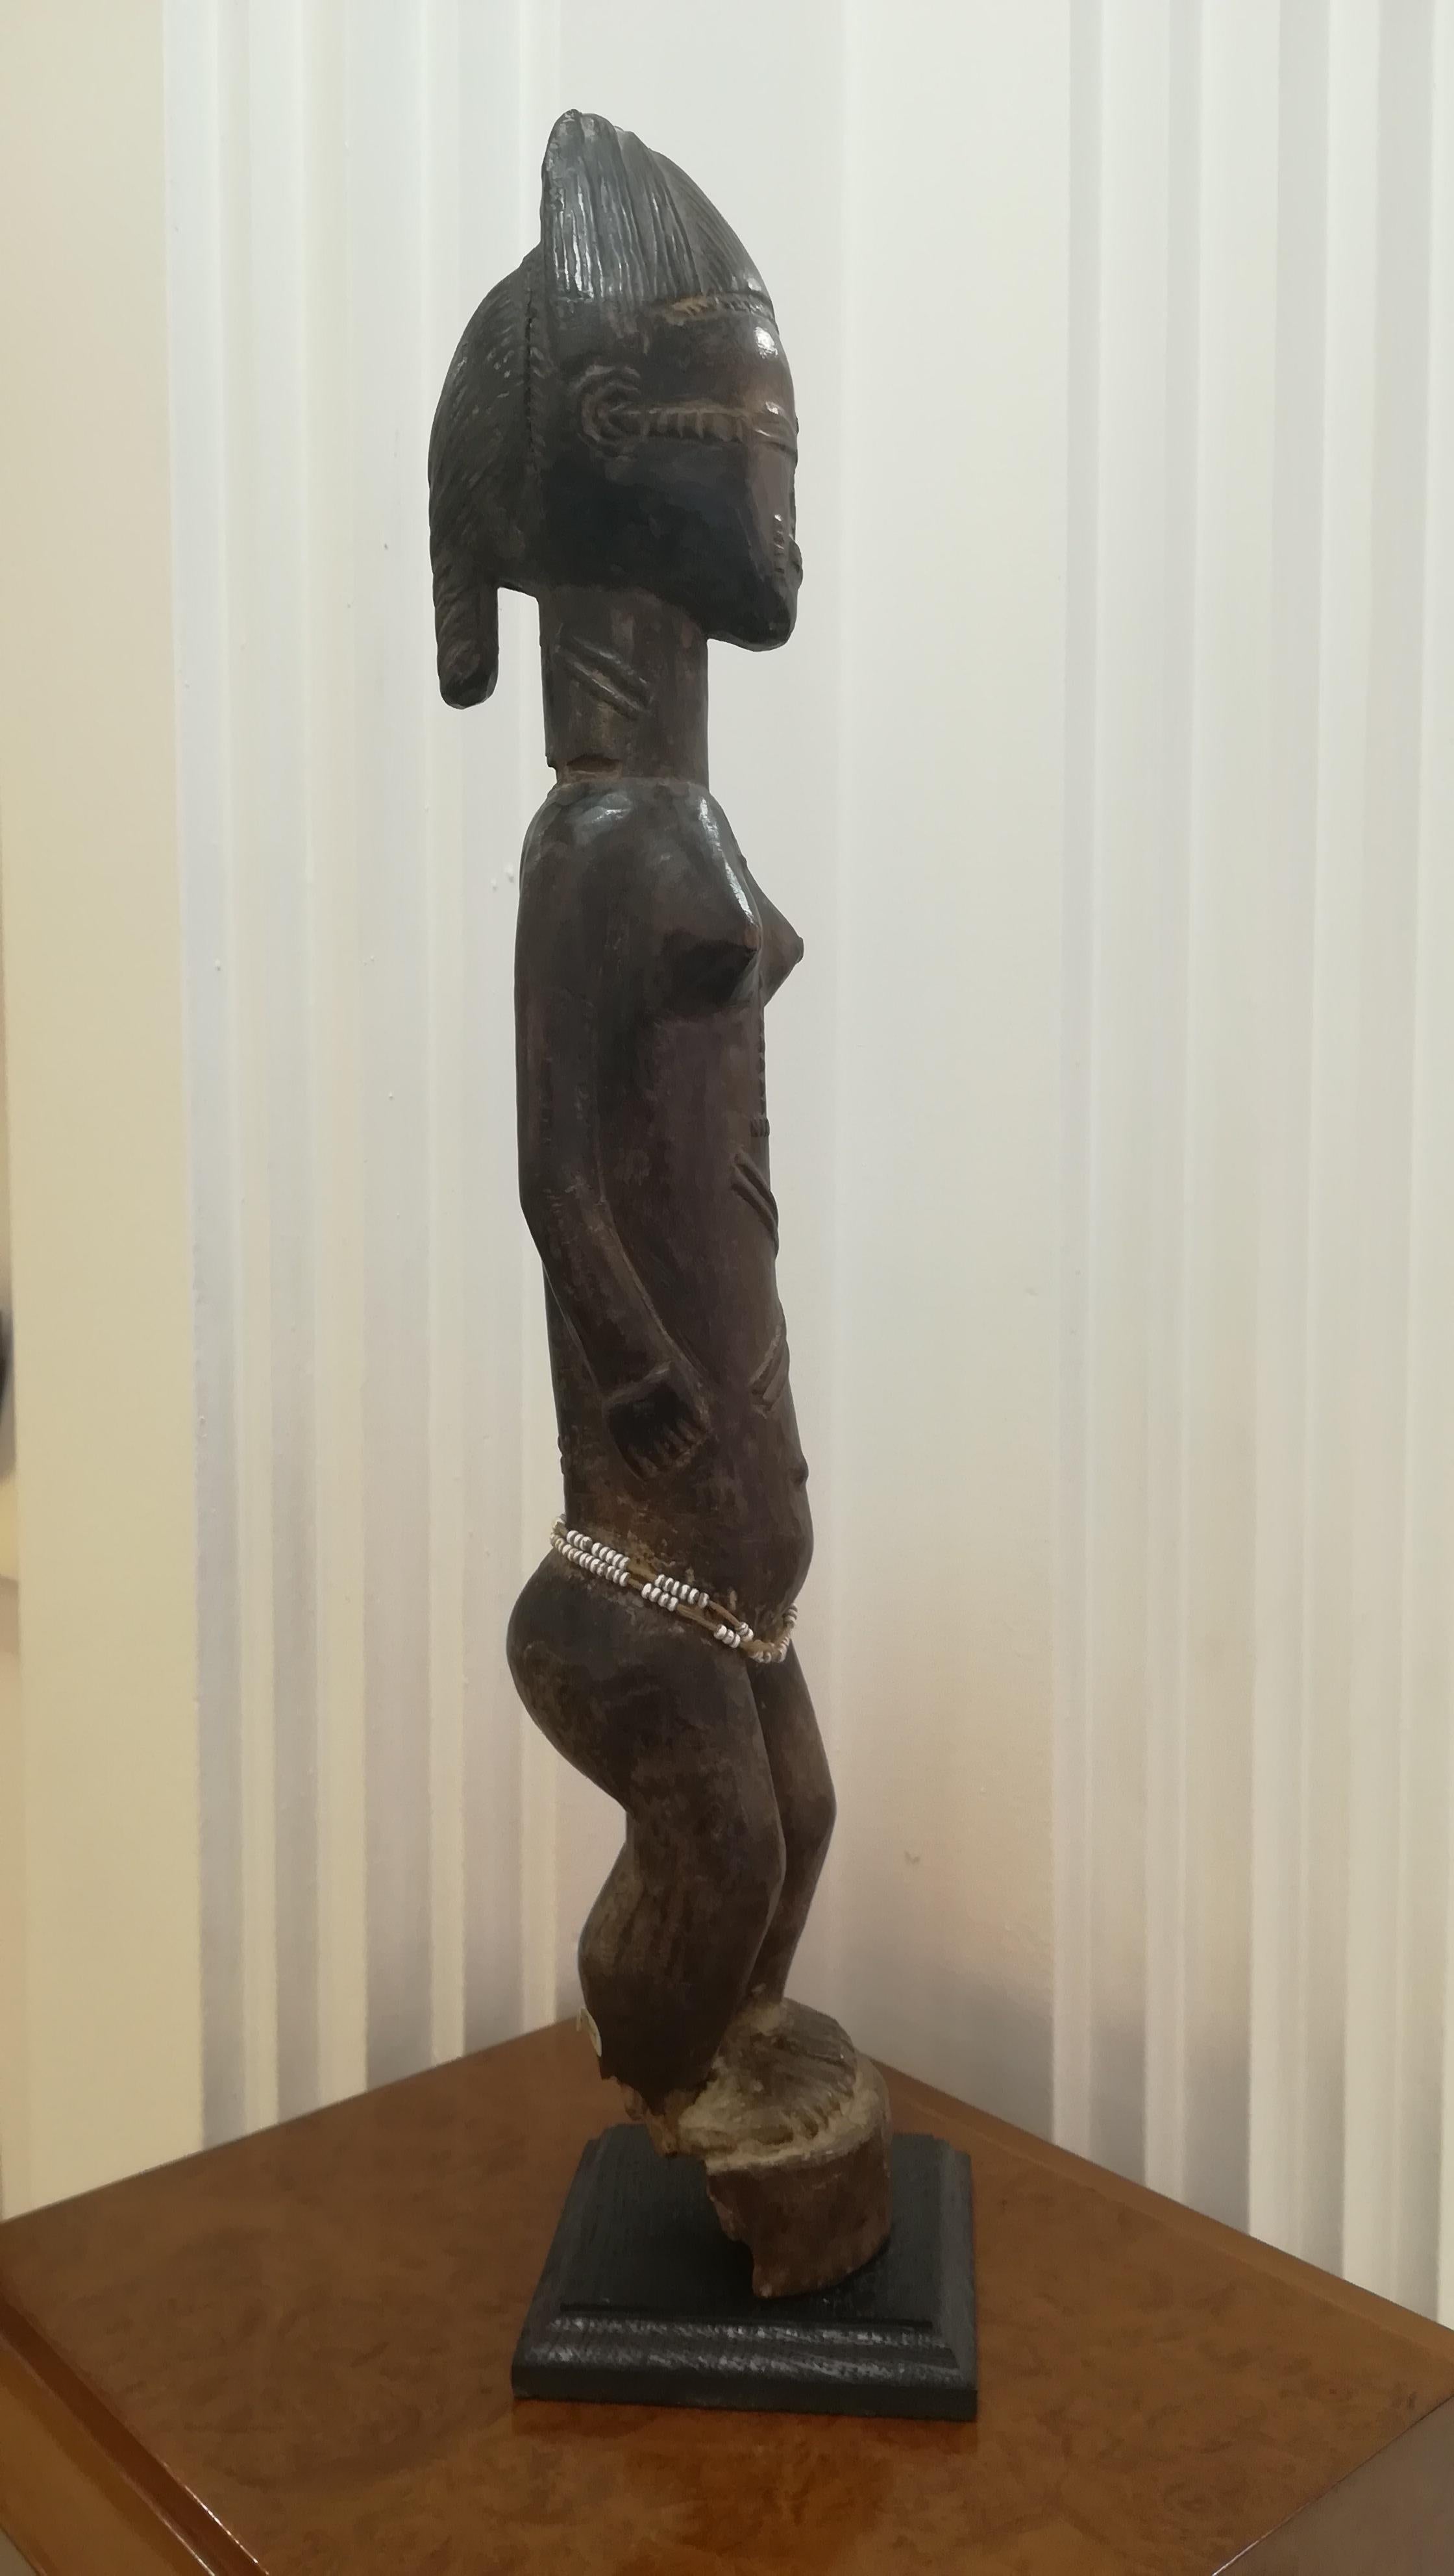 Ivorian Ivory Coast Baoule Figure with Provenance